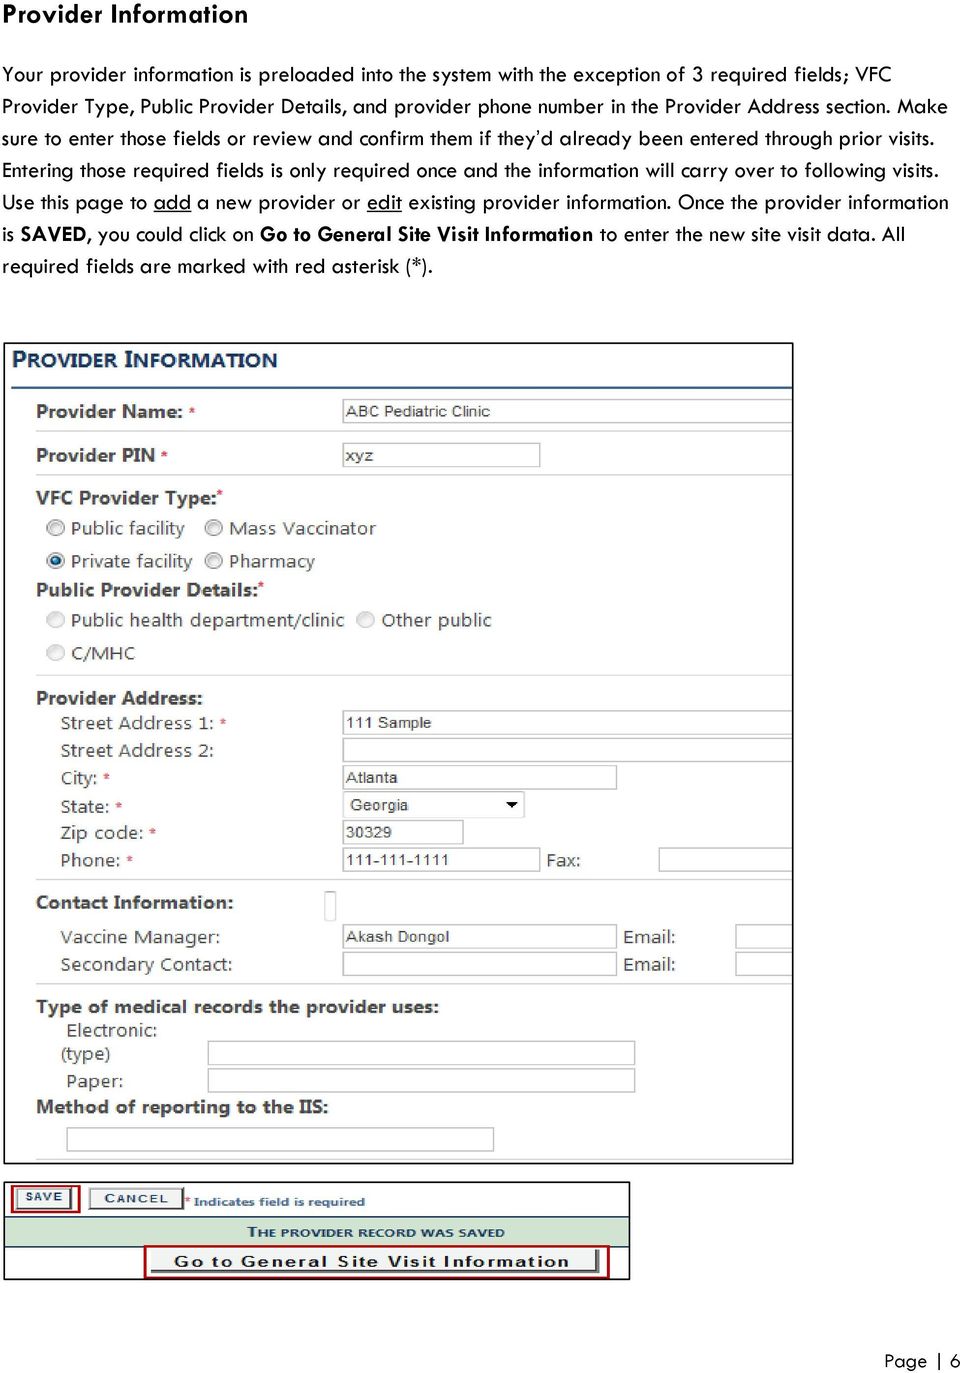 Entering those required fields is only required once and the information will carry over to following visits.